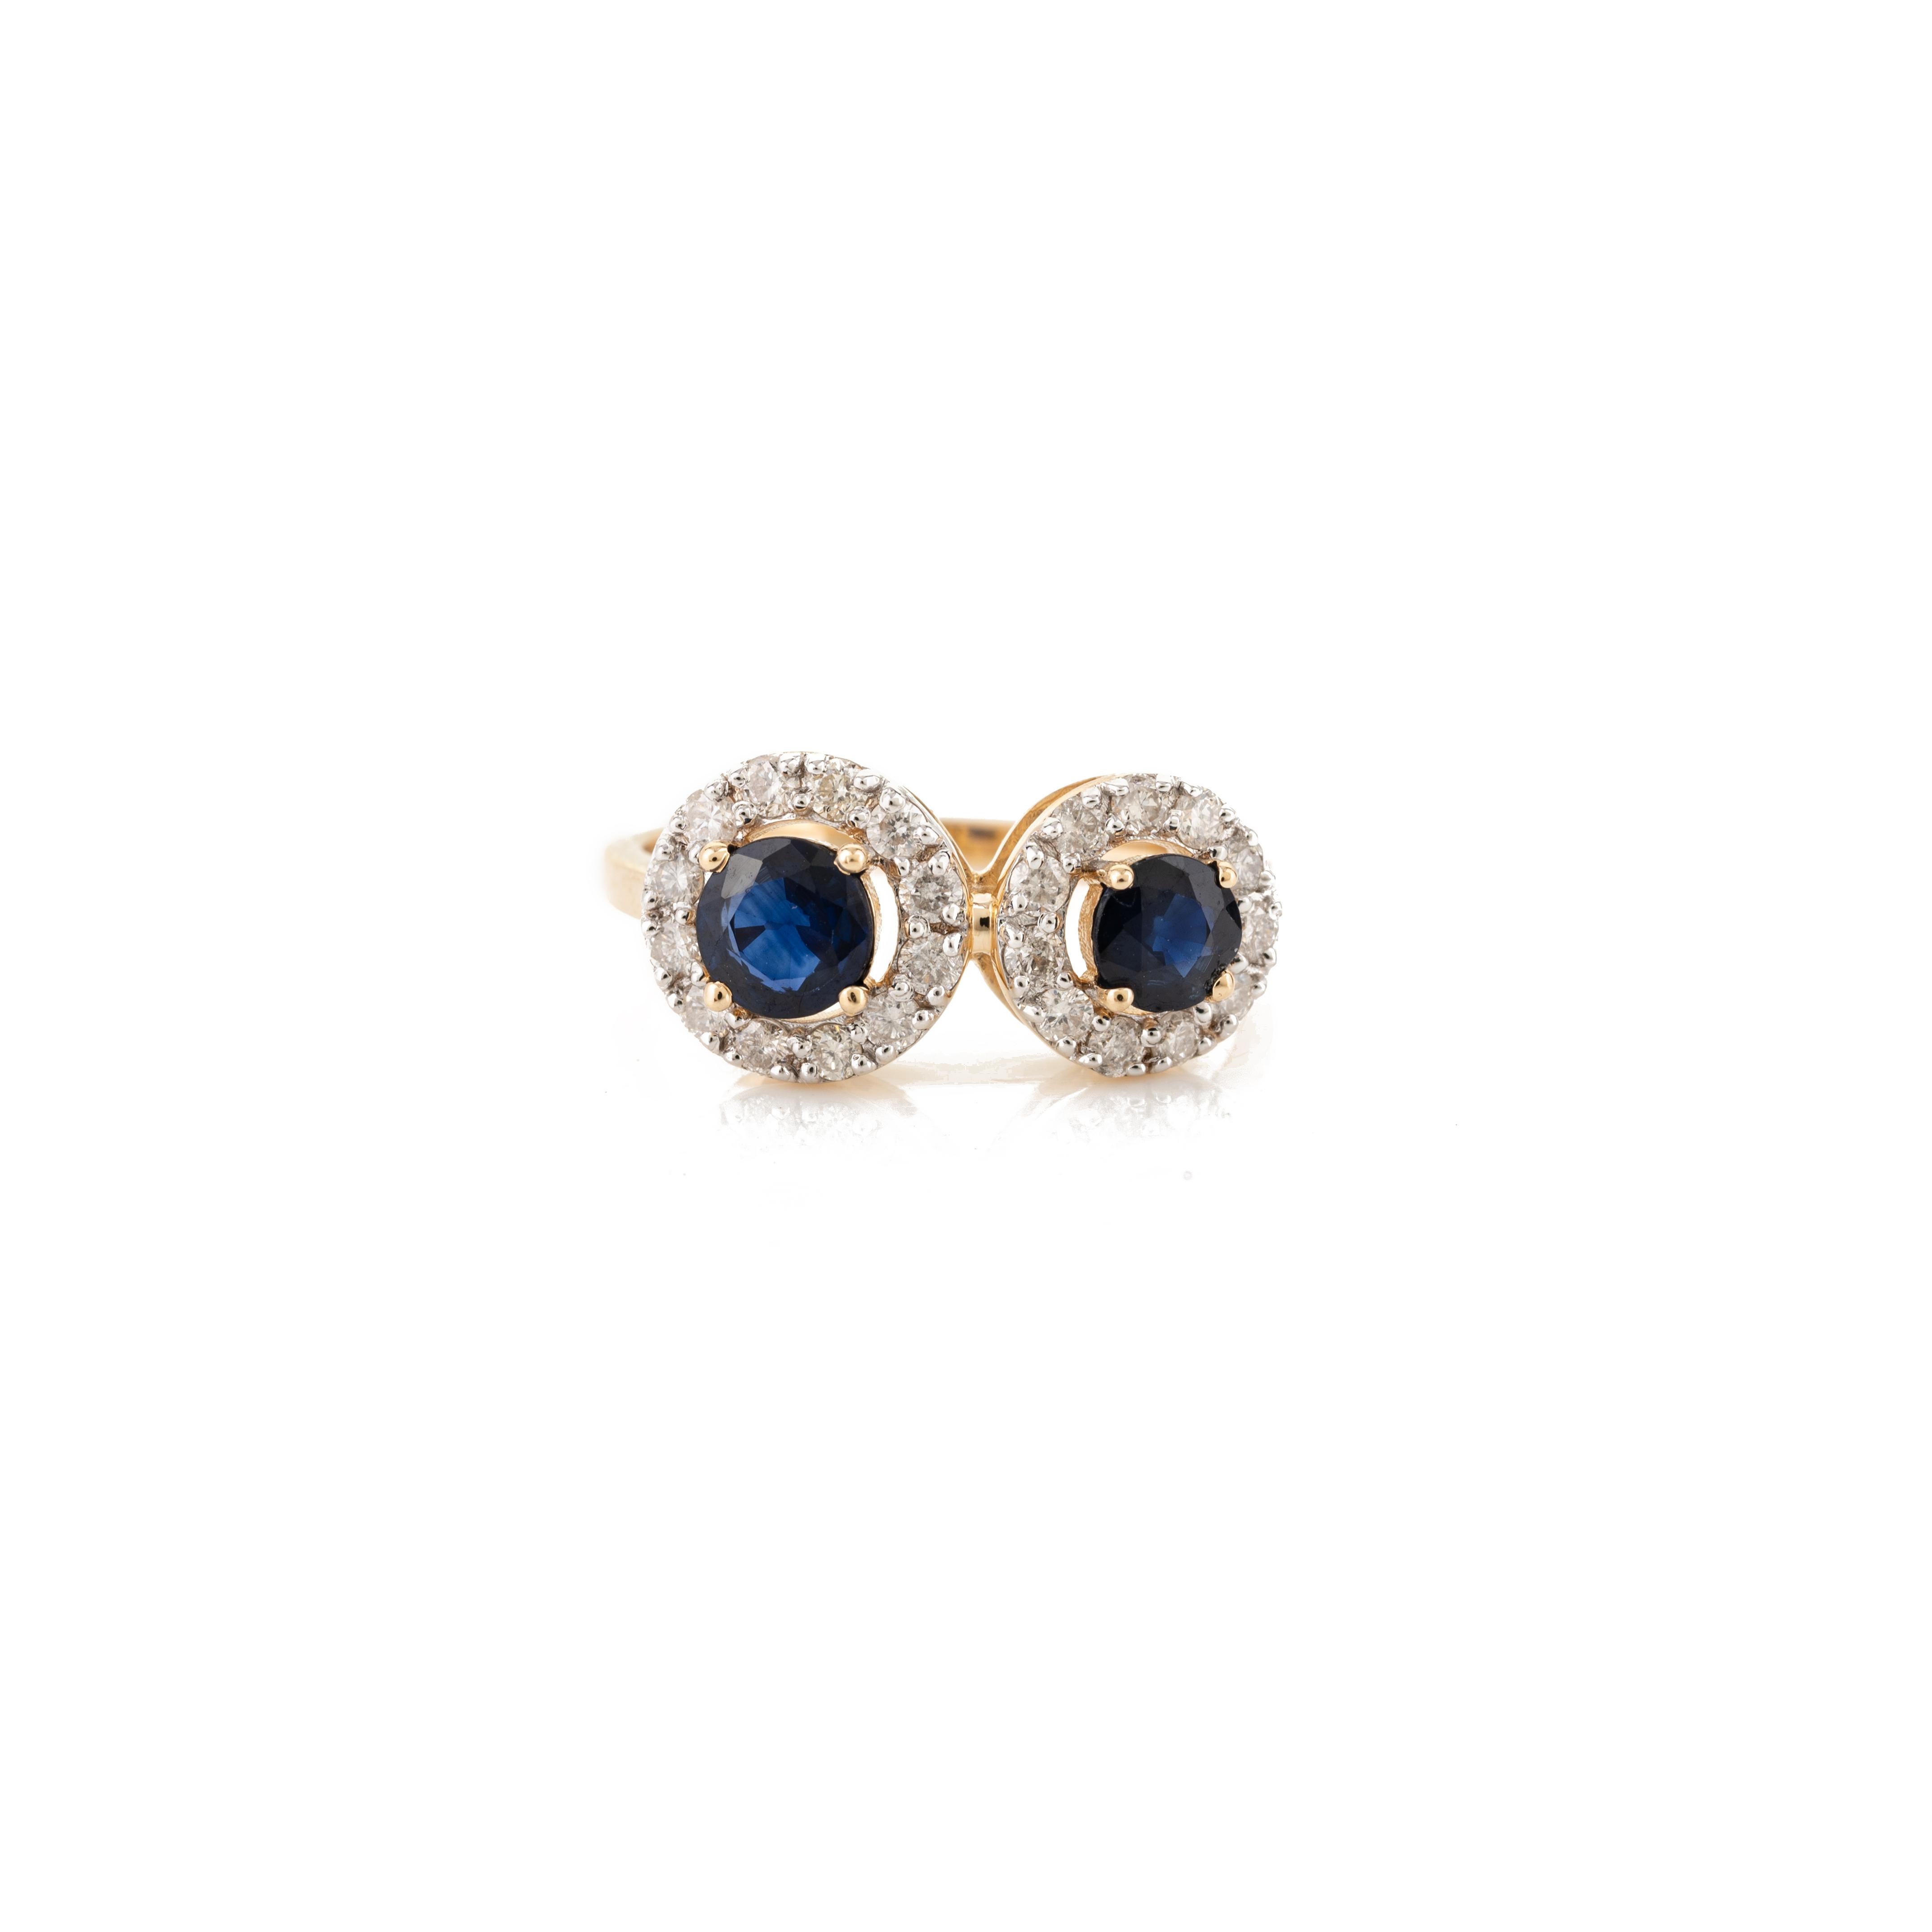 Im Angebot: Classic Two Blue Sapphire Diamond Halo Ring 18k Solid Gelbgold () 3